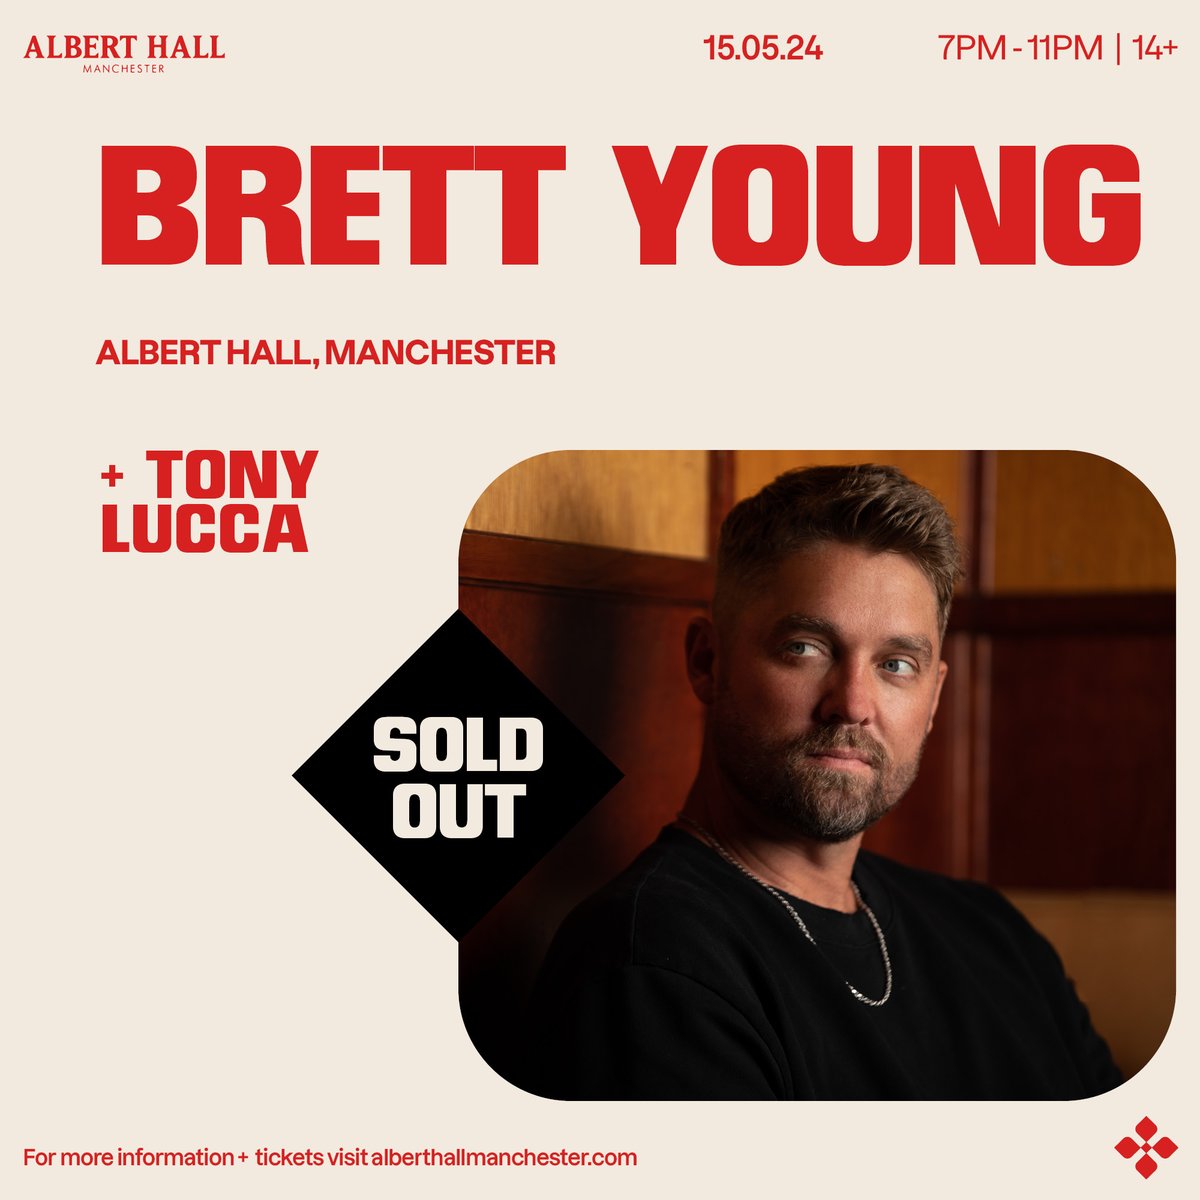 TONIGHT: Doors 7pm #TonyLucca 8pm @BrettYoungMusic 9pm Curfew 11pm SOLD OUT Enjoy the show!